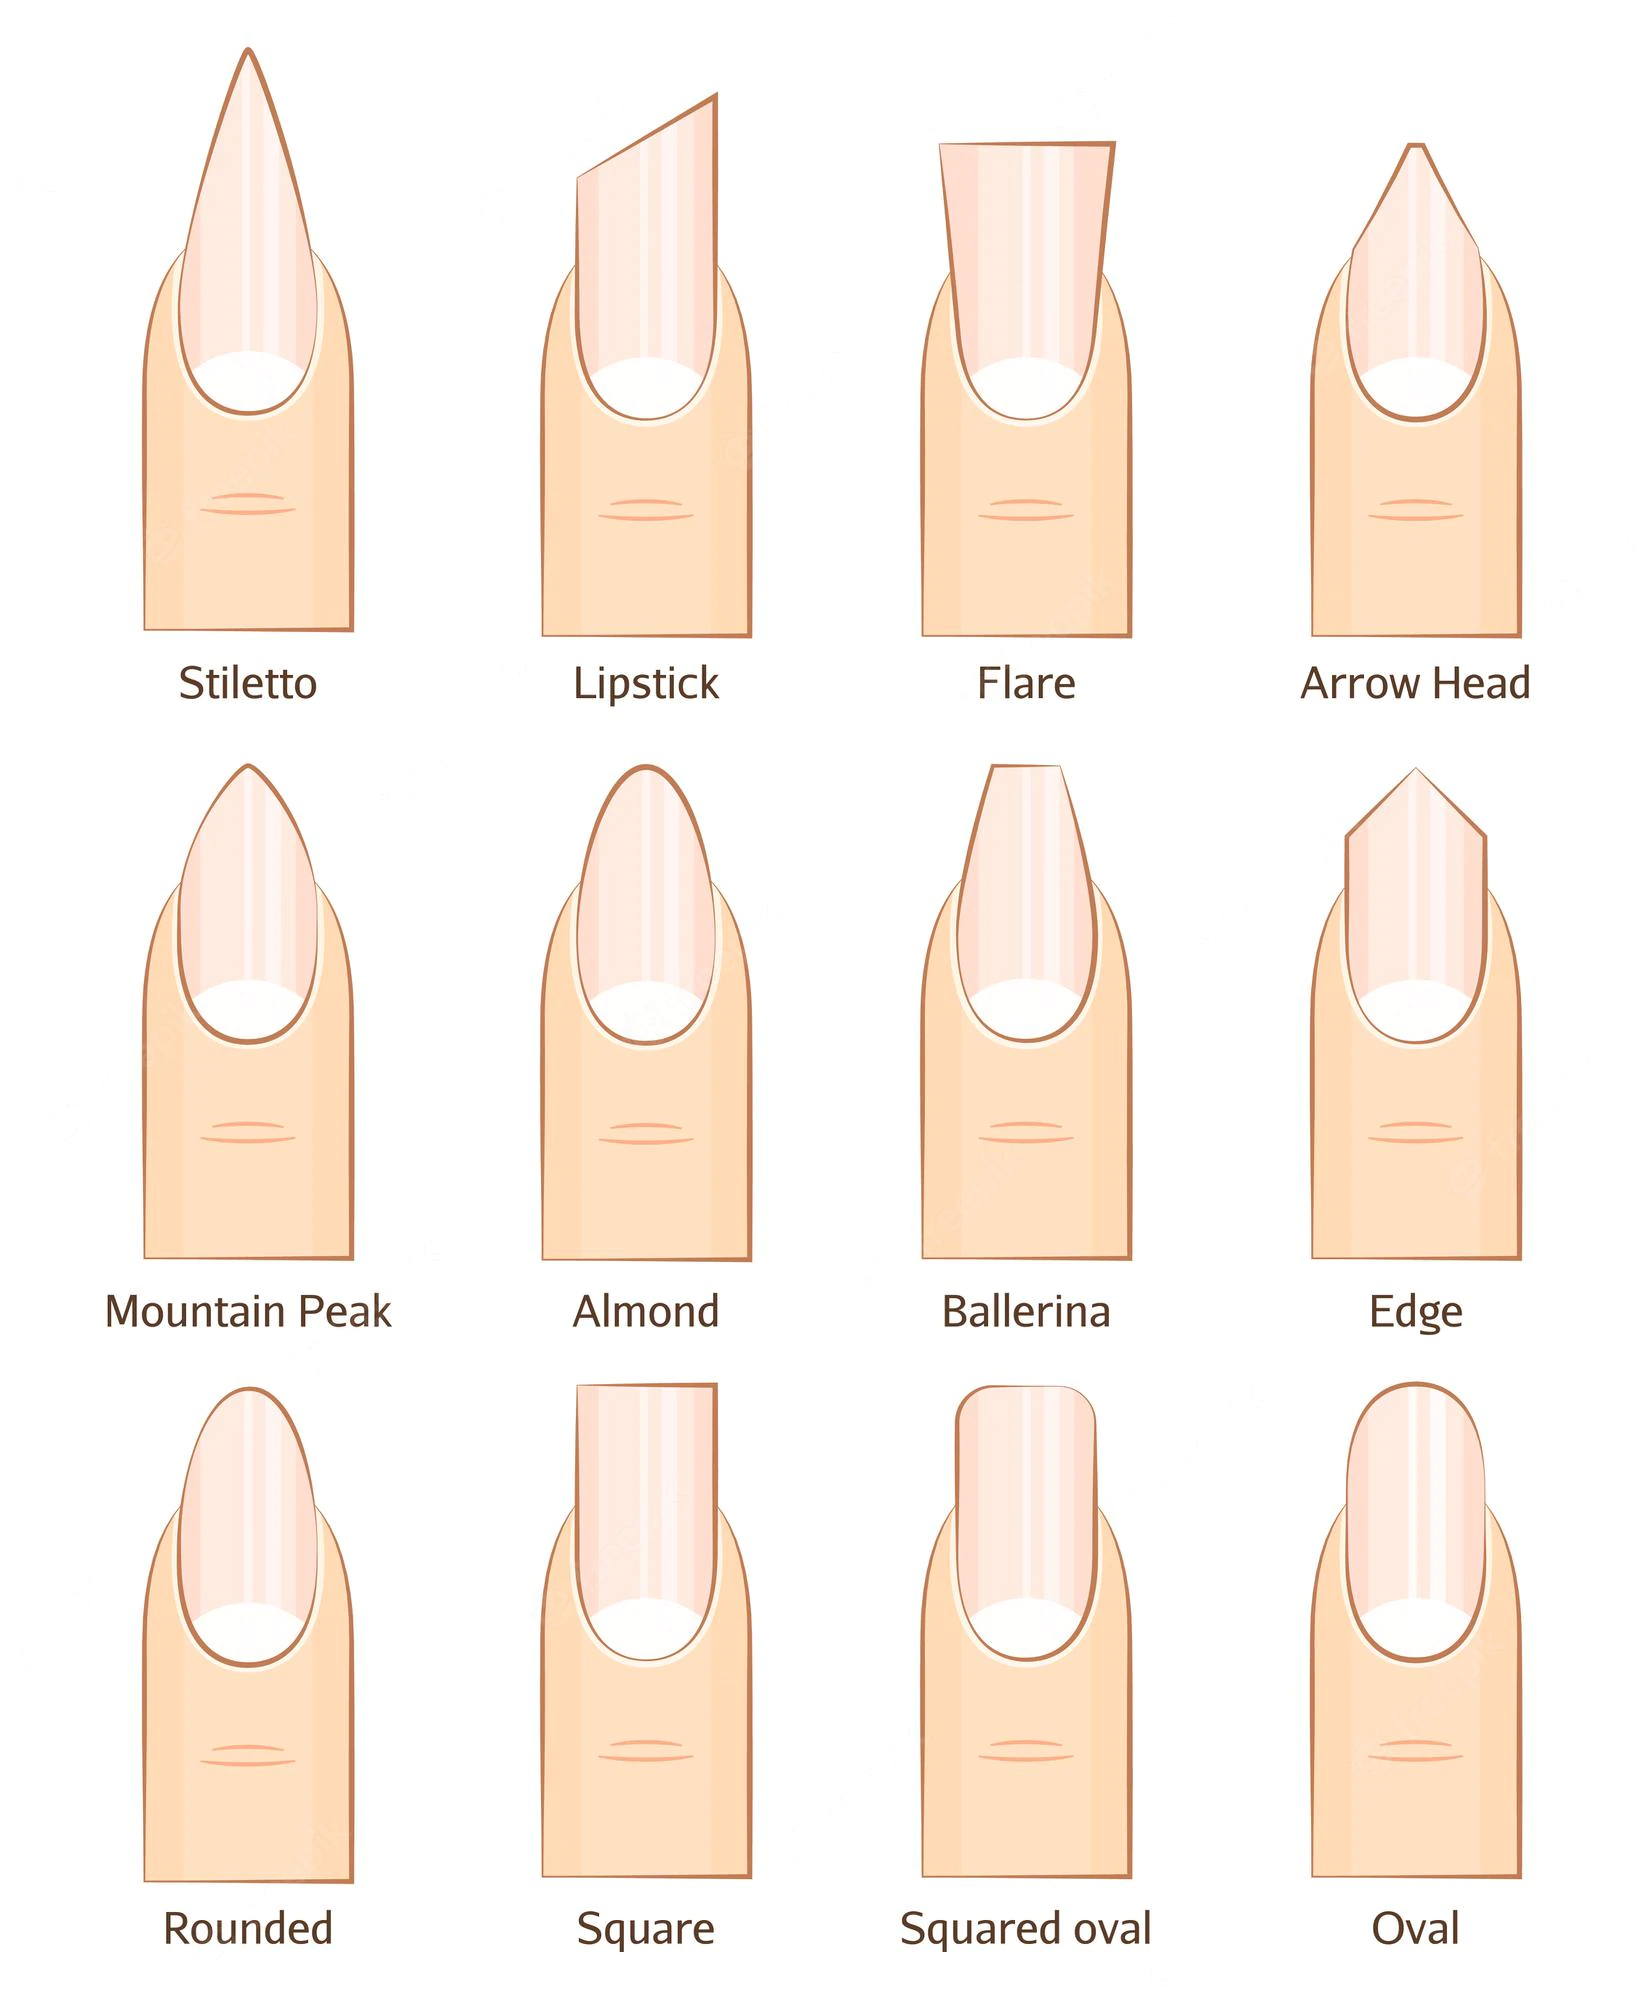 A Guide To The 5 Basic Nail Shapes – How To Pick The Right One